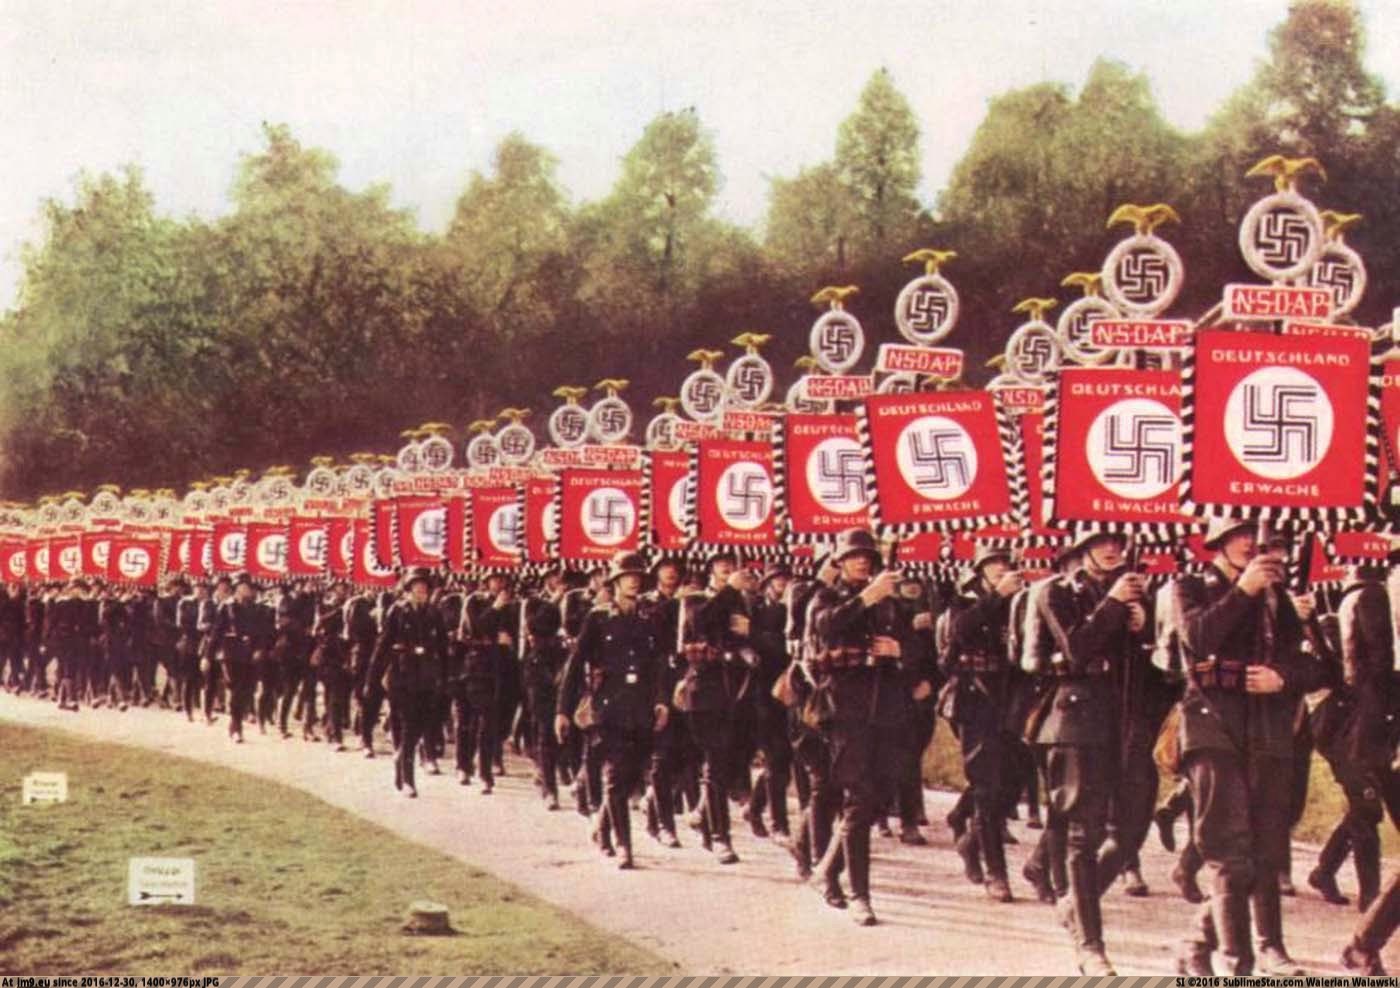 Nazis on parade. (in Restored Photos of Nazi Germany)